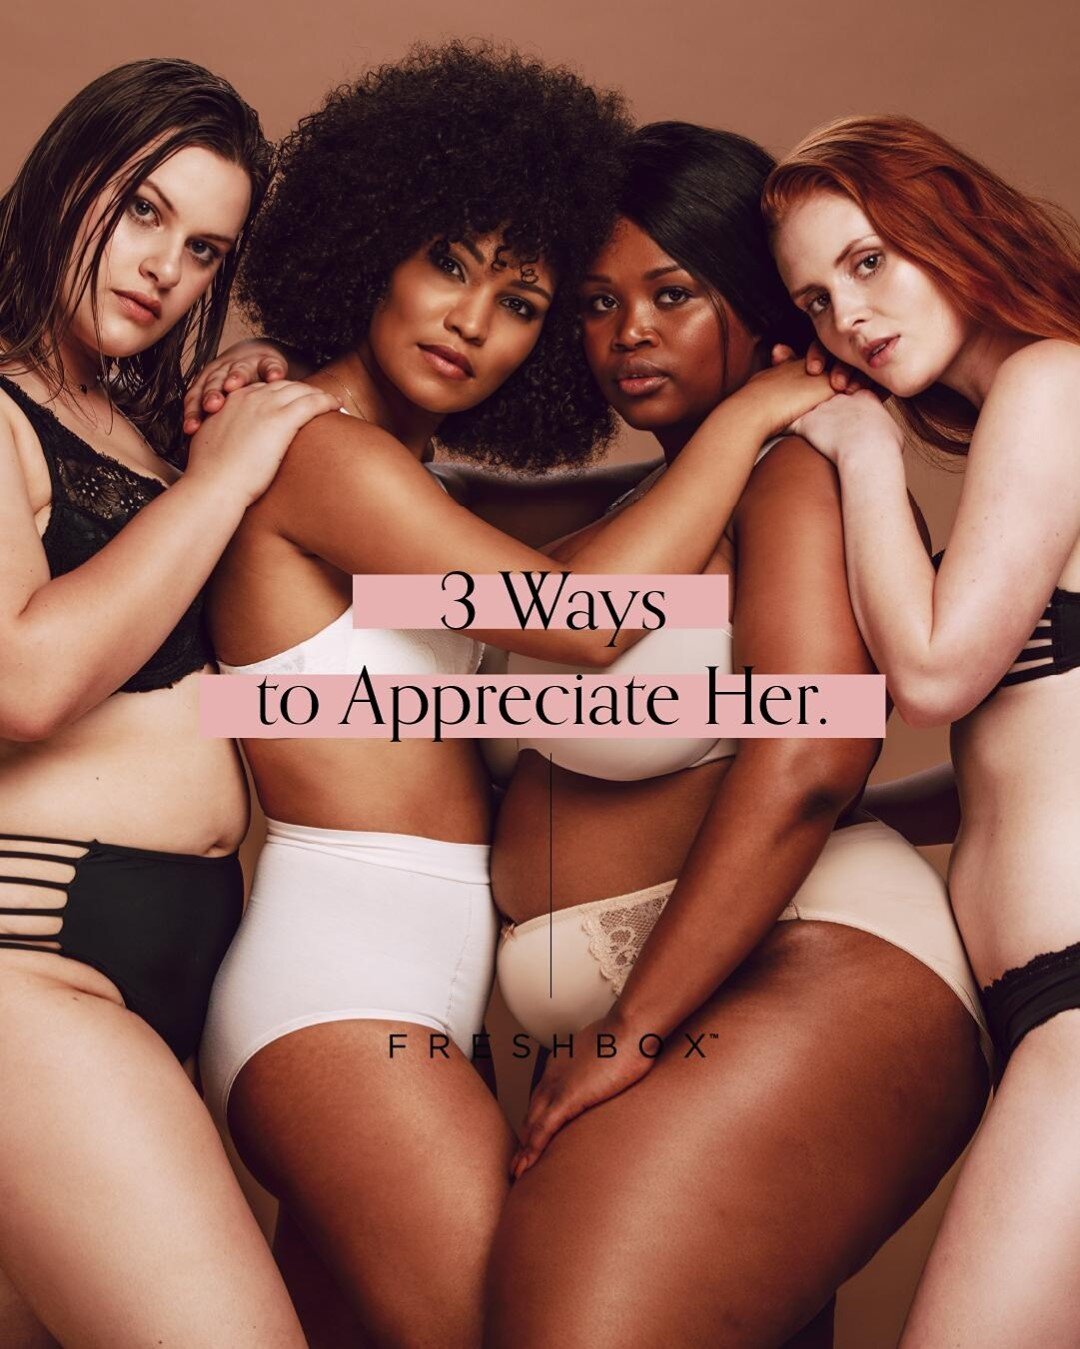 And by her, we mean herrr. Most women have no idea what&rsquo;s down there and that's just plain sad. The more you appreciate your most precious body part, the more she will appreciate you. That's true for most things. Today, and everyday, take some 